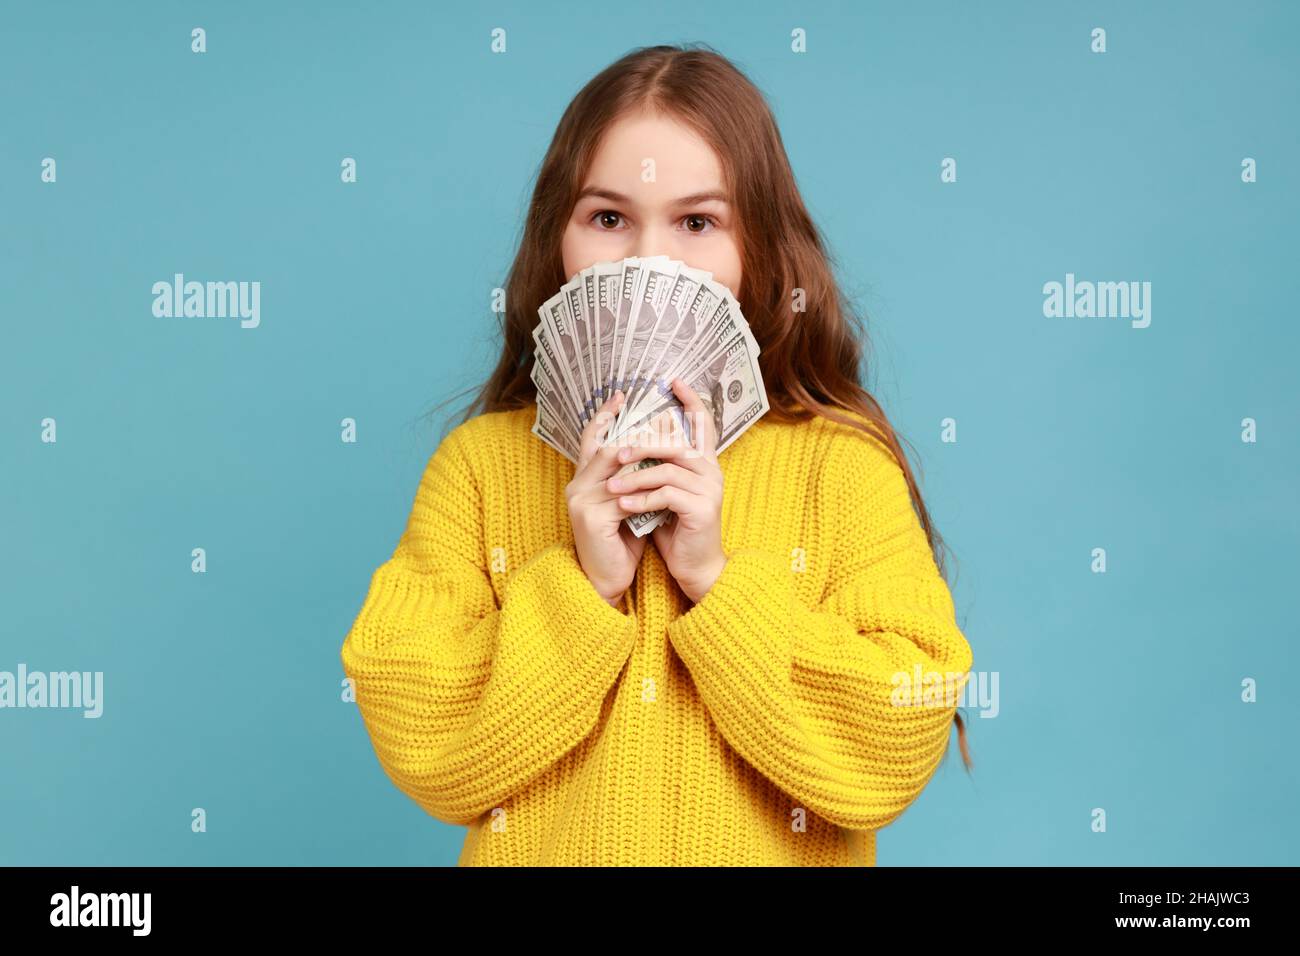 Portrait of little girl hiding half face with money, peeking out of dollar bills, looking at camera, wearing yellow casual style sweater. Indoor studio shot isolated on blue background. Stock Photo